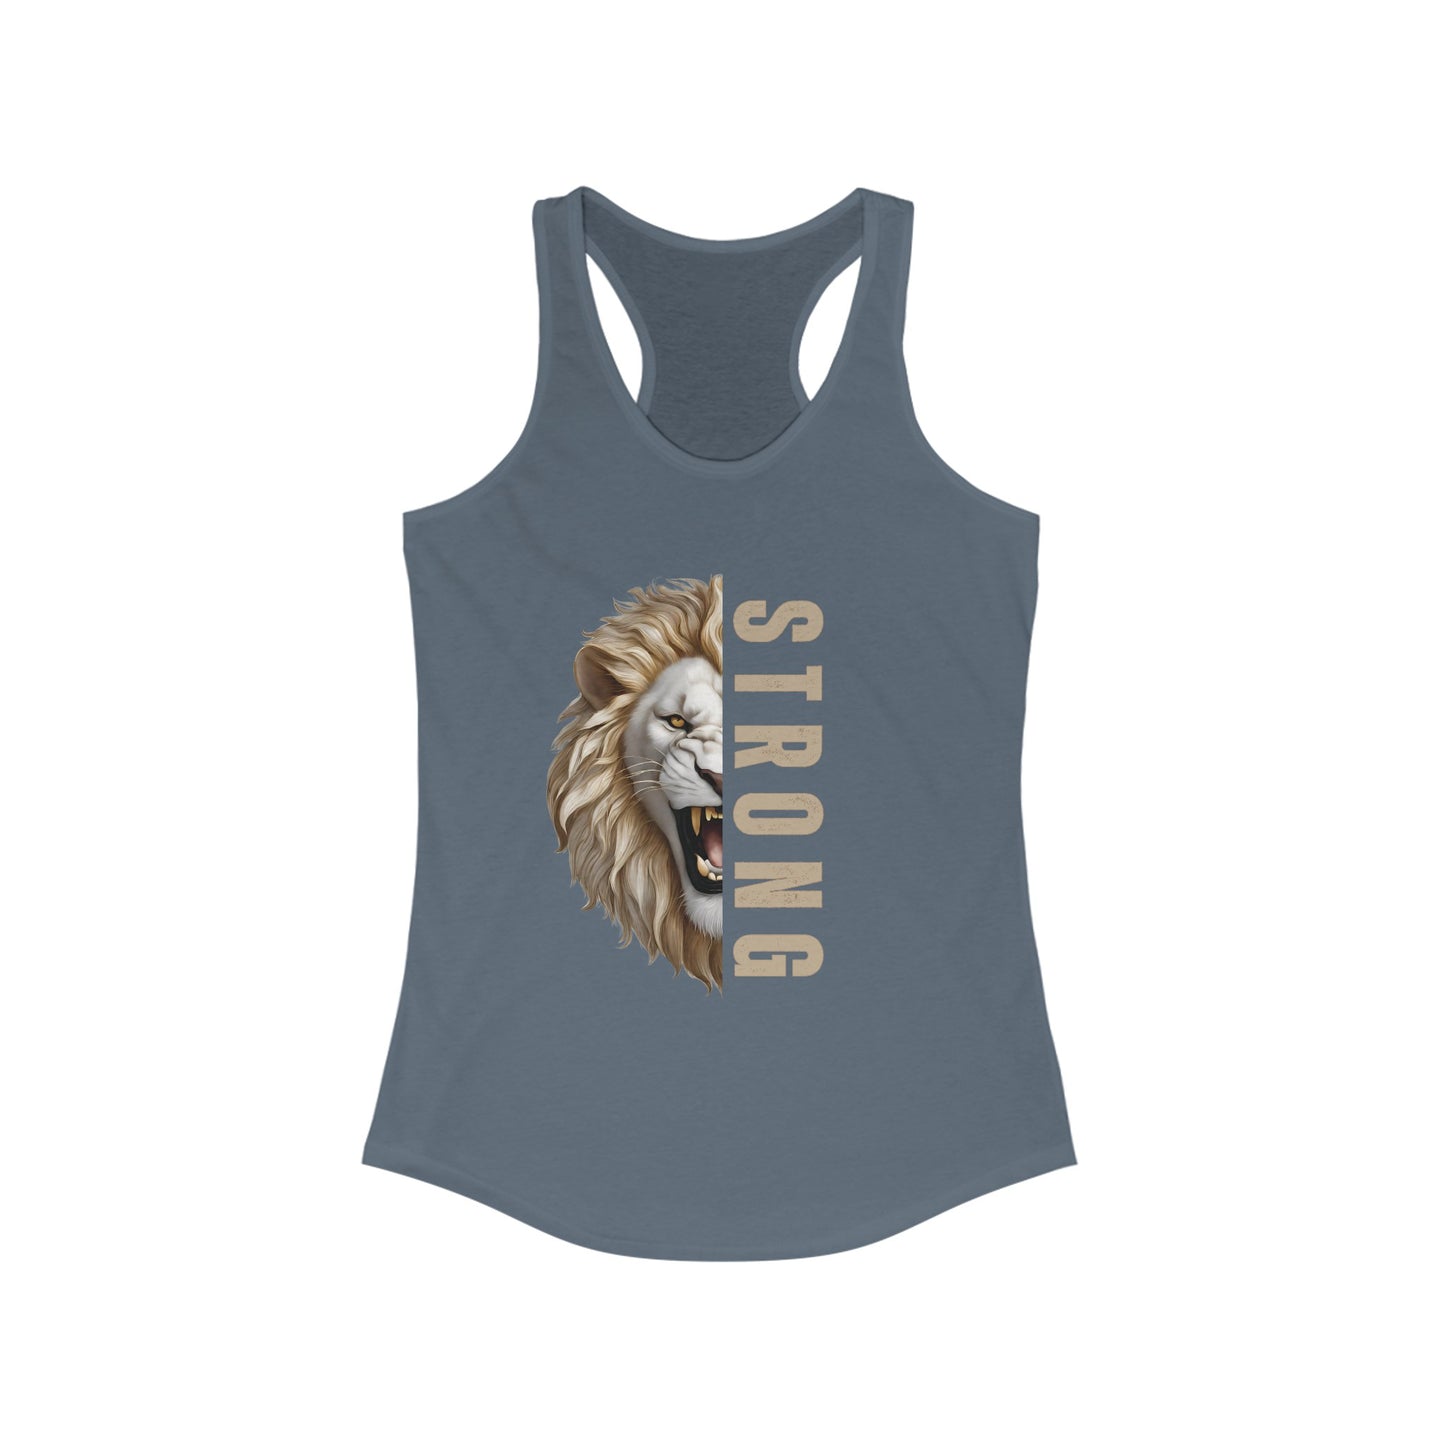 Strong like a lion Graphic Tank Top